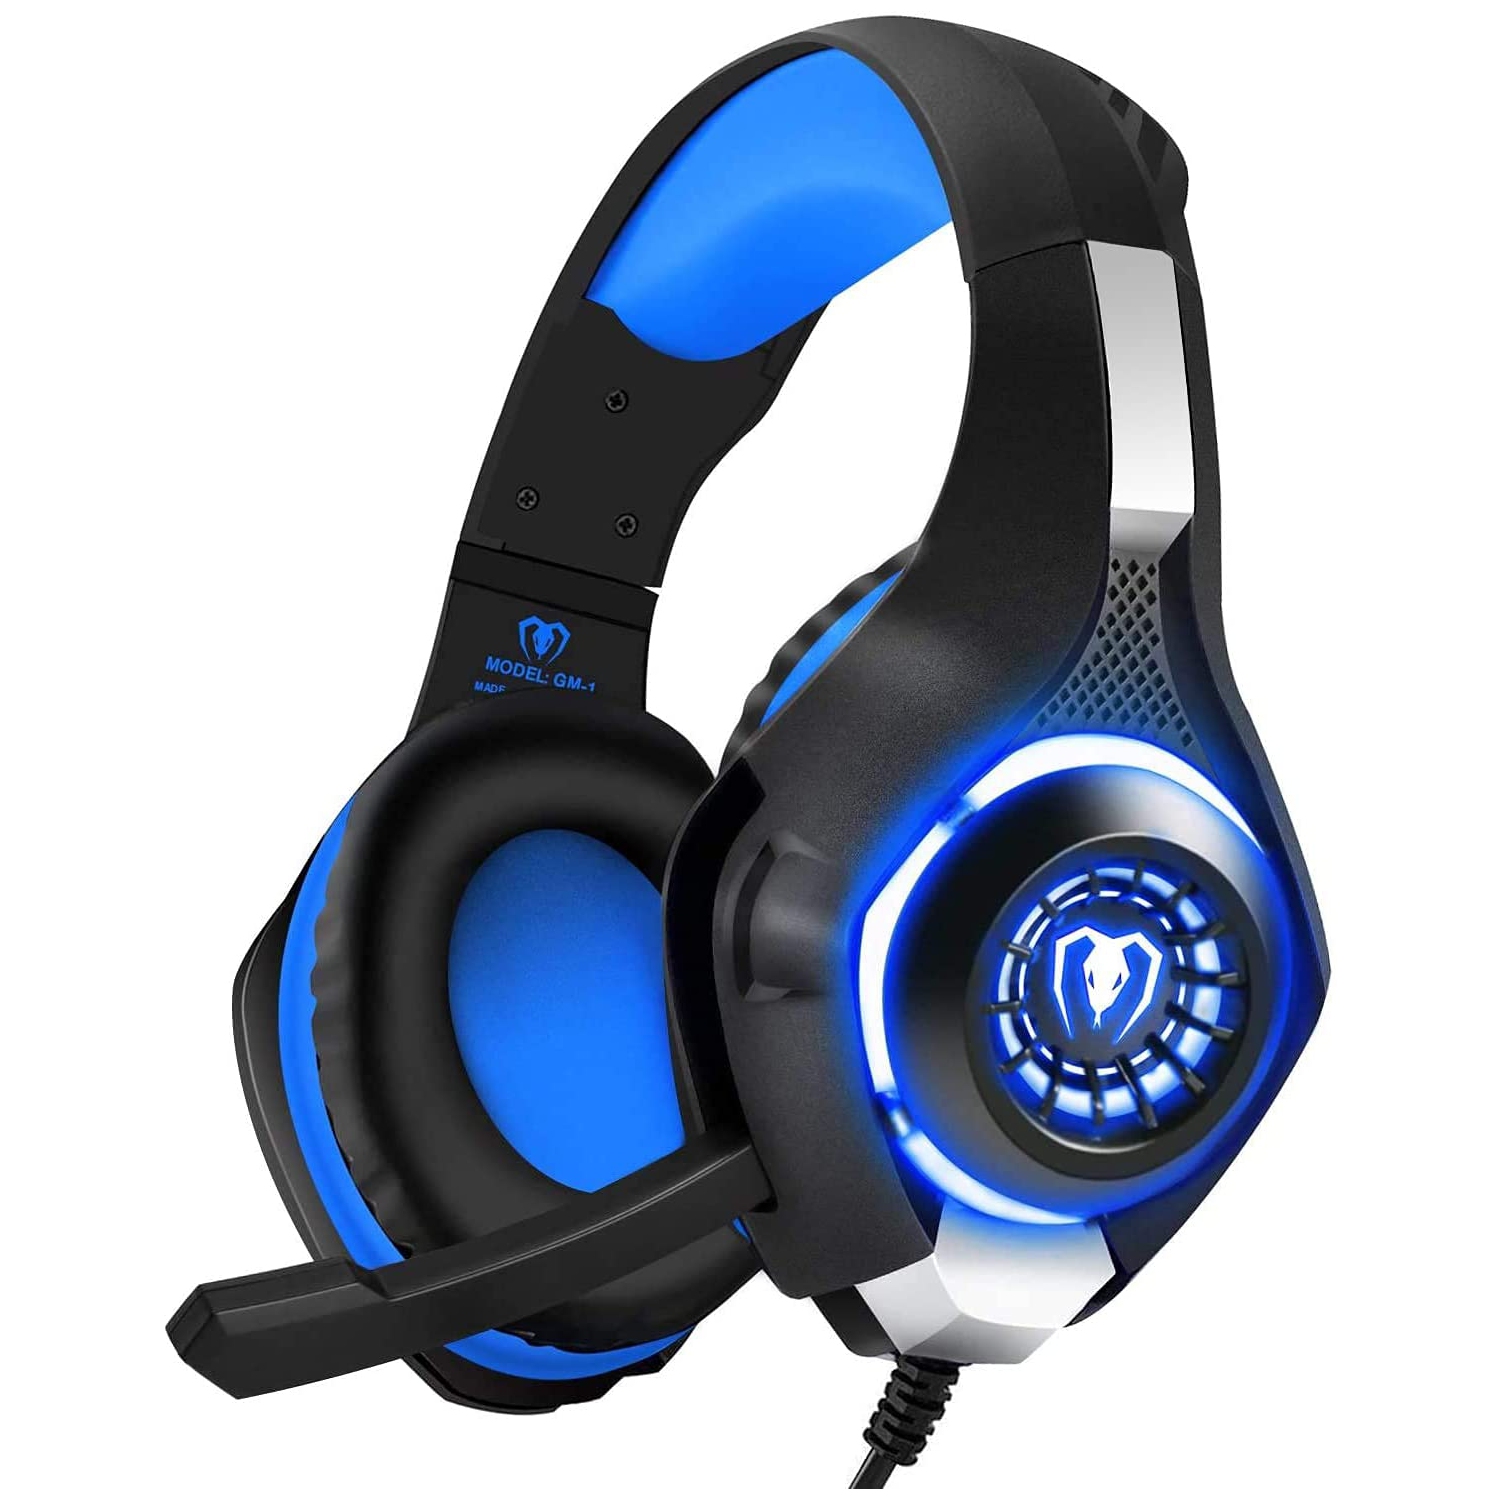 3.5mm Professional PS4 Gaming Headset Headphone with Mic and LED Lights for Playstation 4, Xbox one, Laptop,